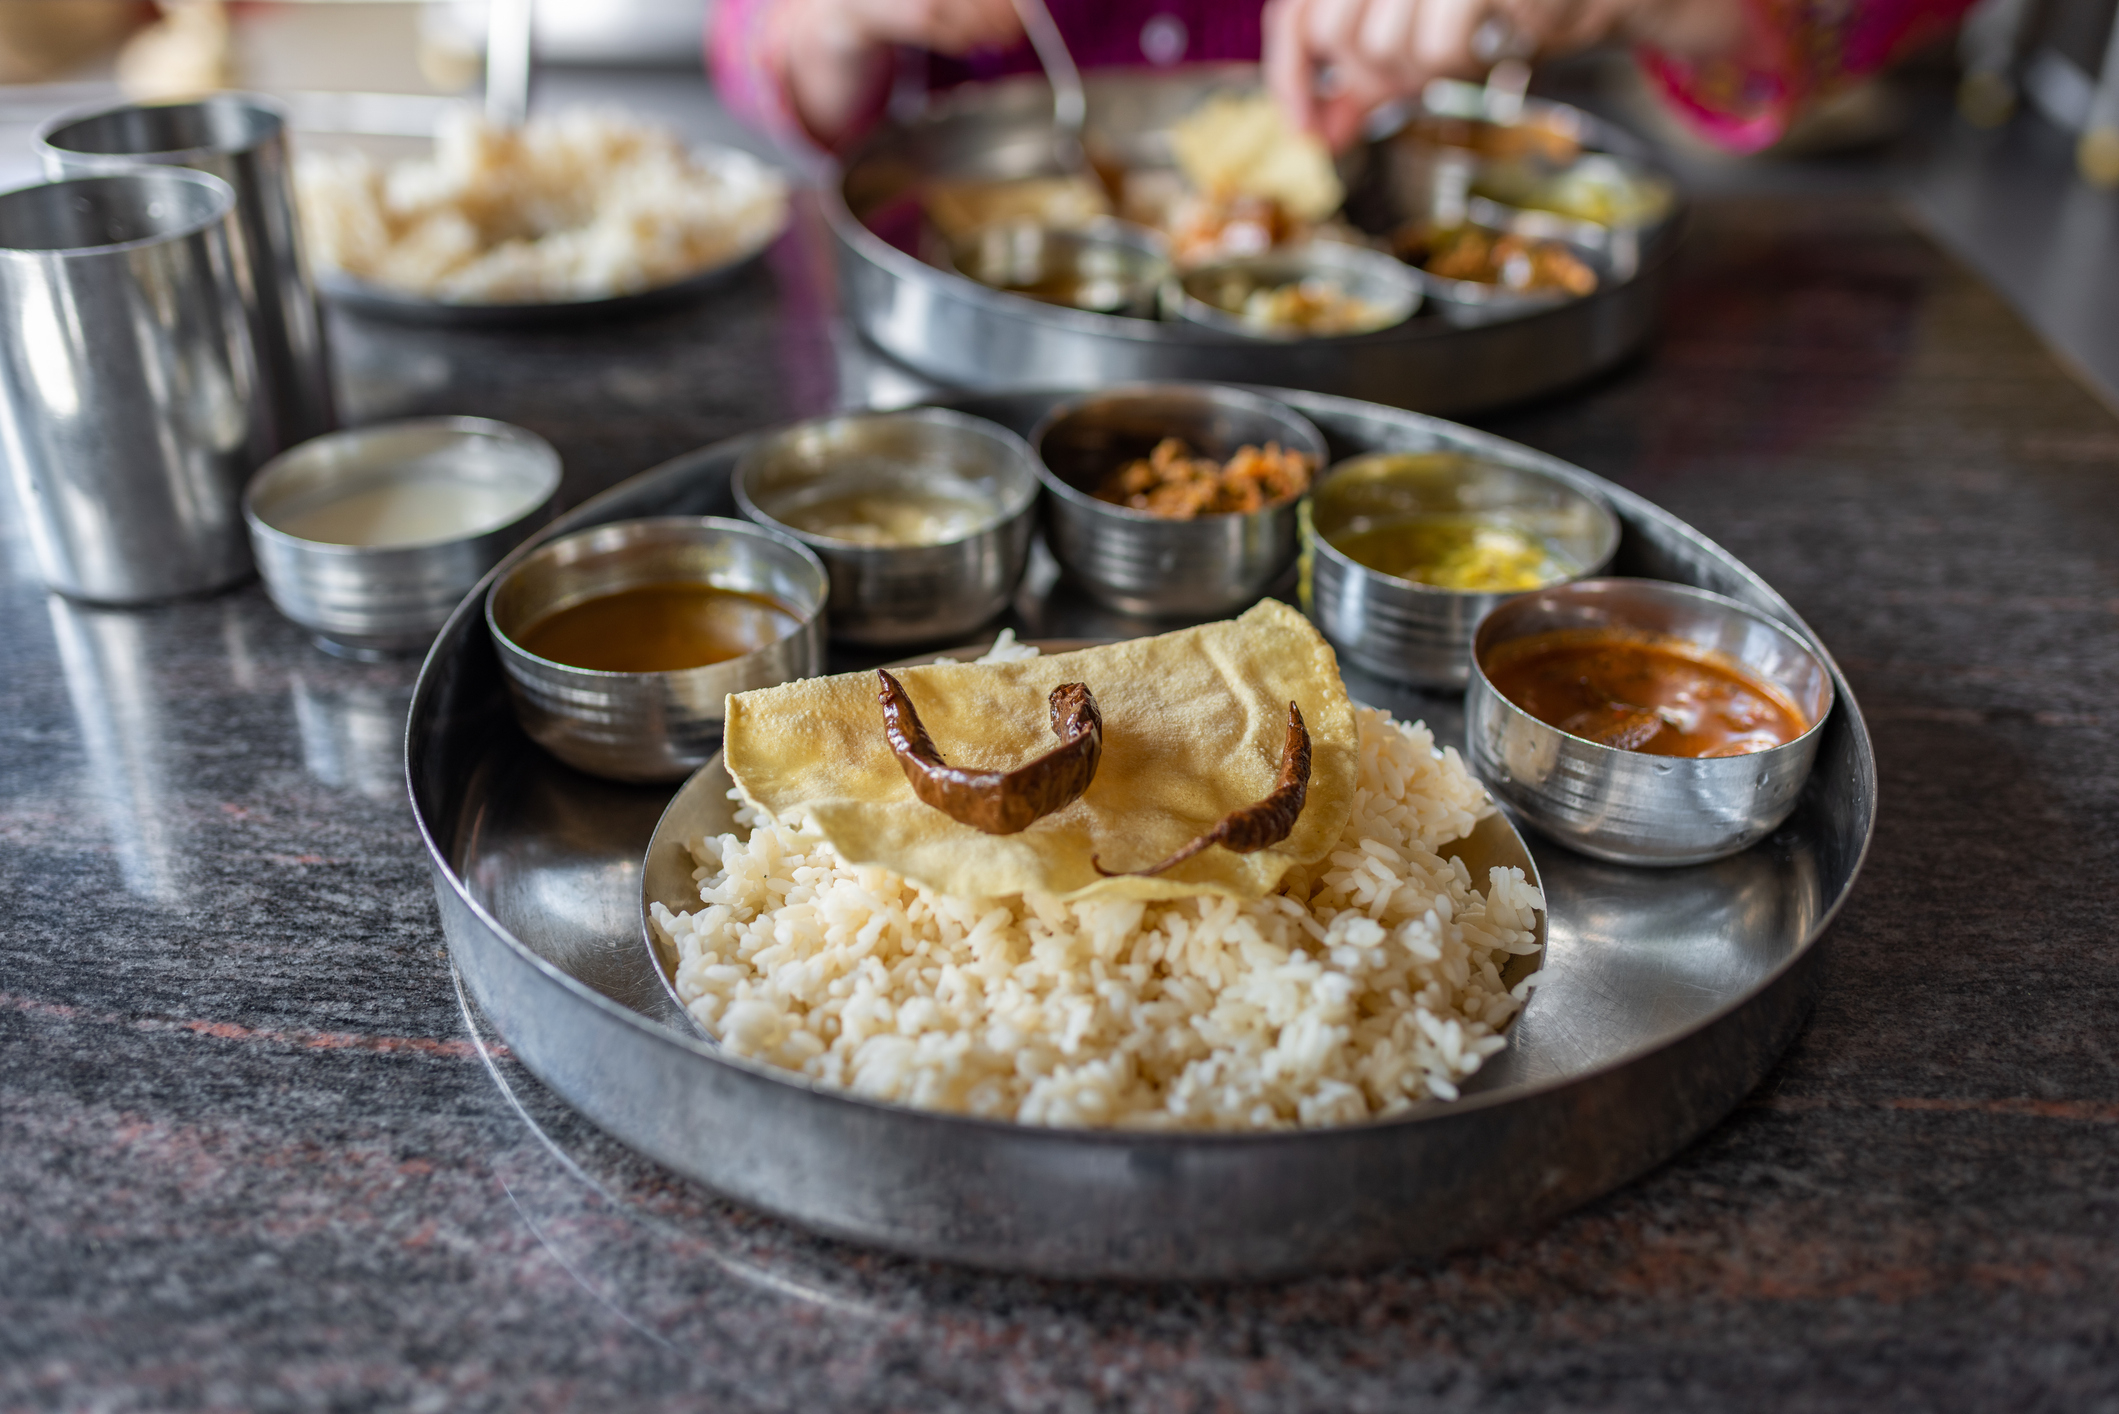 Indian thali with rice, various curries, and a papadum on a metal tray, hands serving food in background